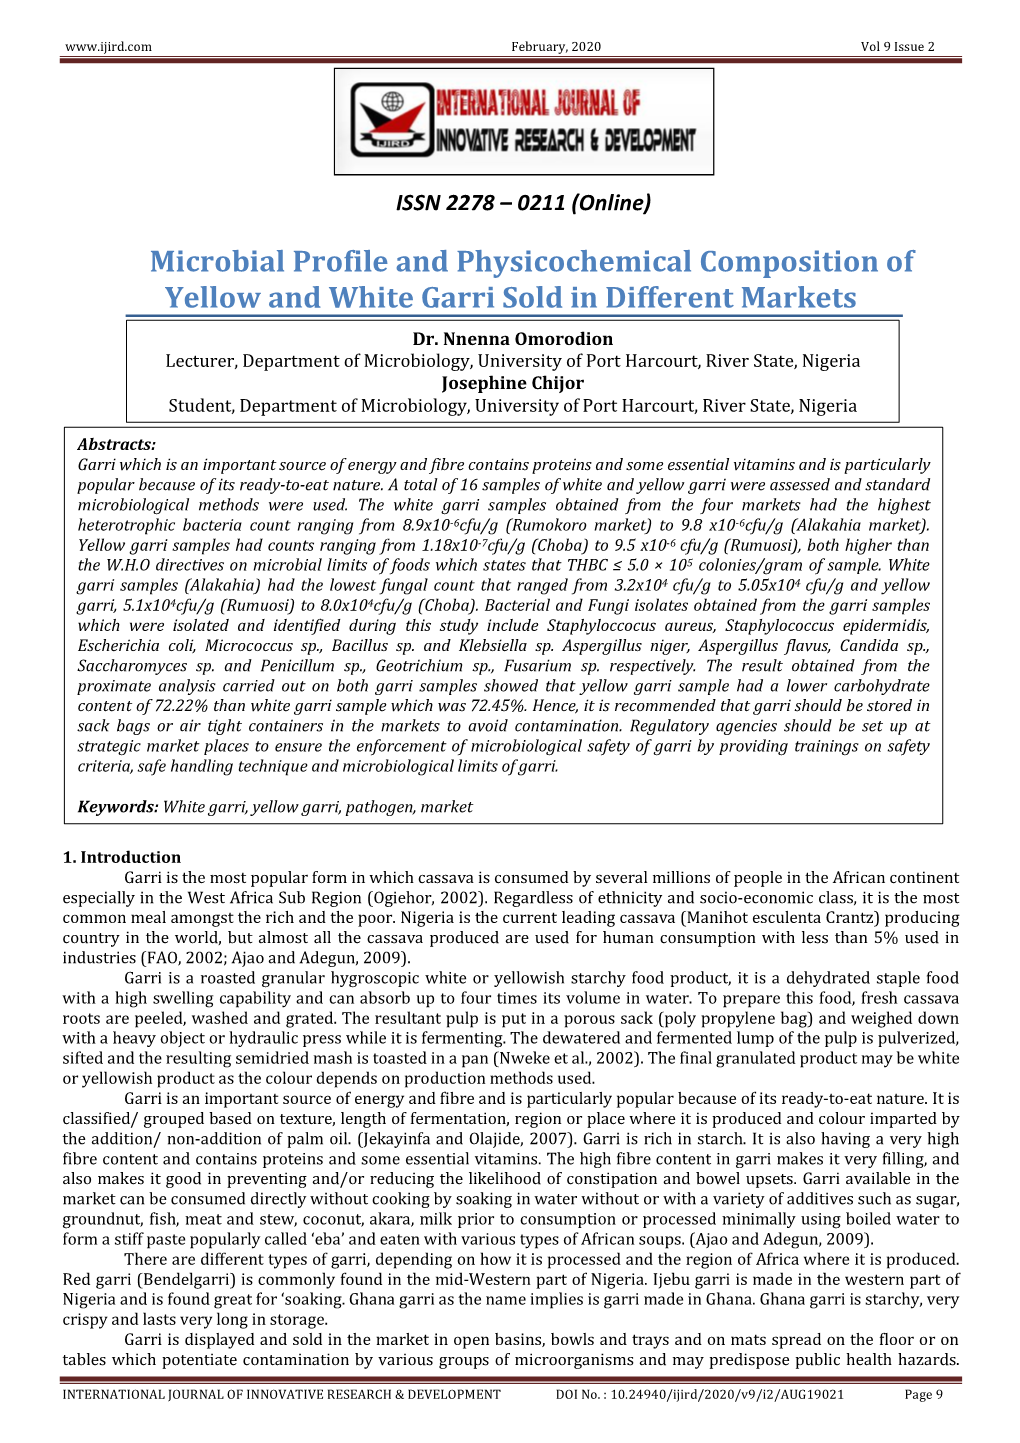 Microbial Profile and Physicochemical Composition of Yellow and White Garri Sold in Different Markets